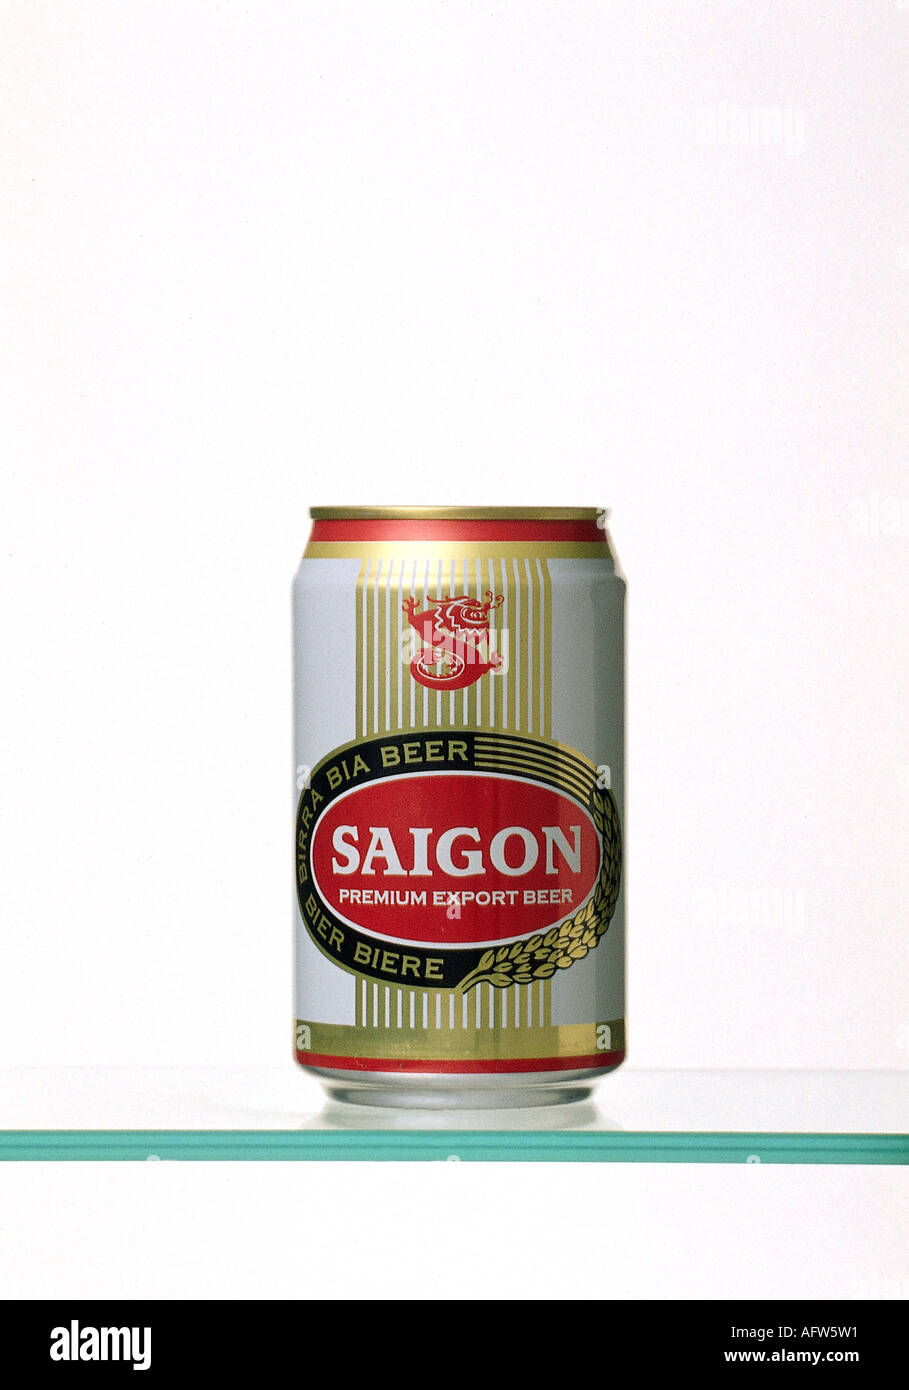 food and beverages, alcohol, beer, can 'Saigon Premium Export Beer', Saigon Beer Company, Vietnam, cans, Additional-Rights-Clearance-Info-Not-Available Stock Photo